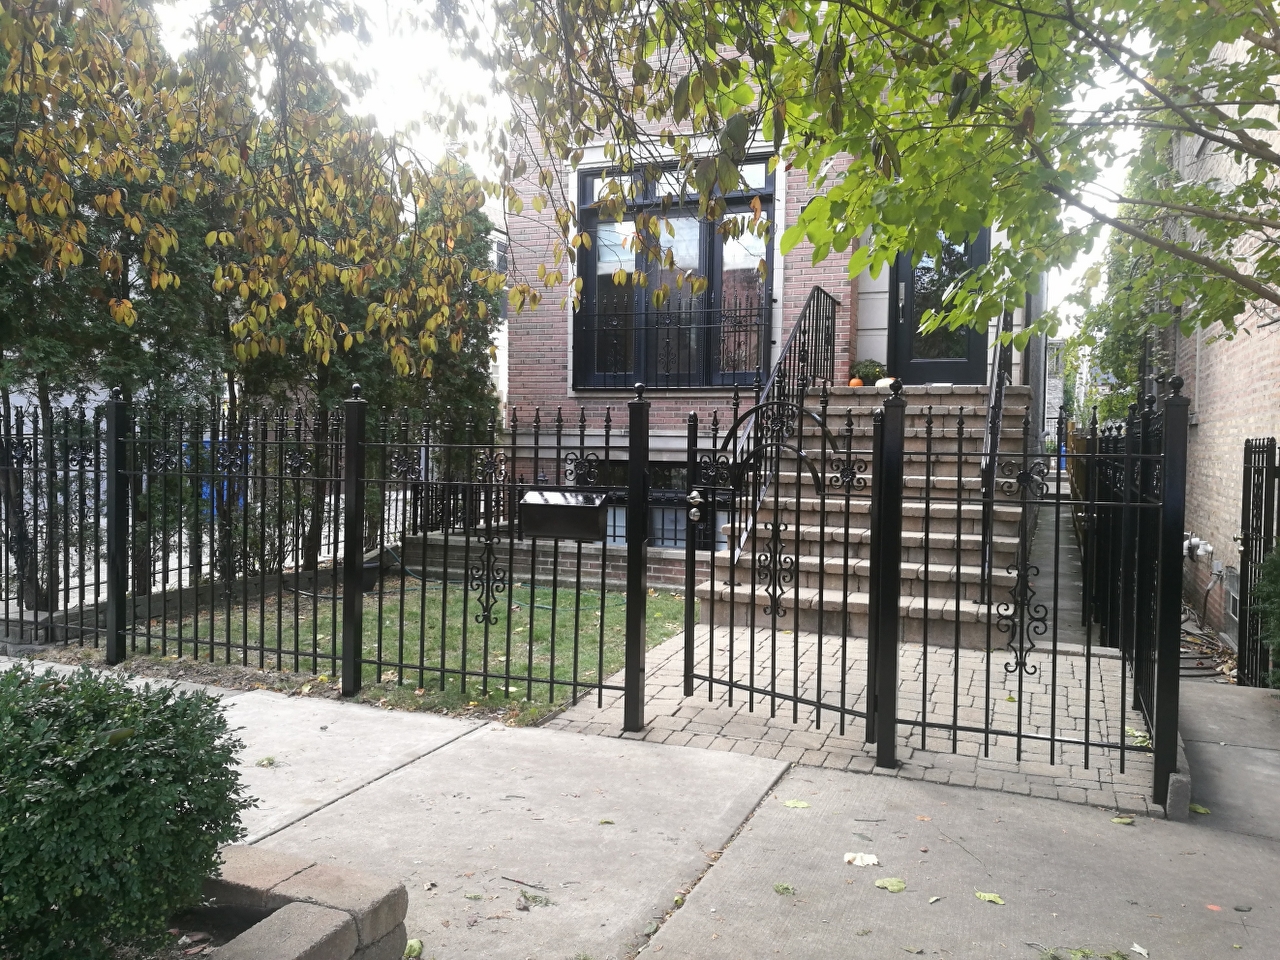 2017.10.30._Wicker_Par_railings_fence_stairs_rust_removal - Windy-Painters-.-Chicago-painter.-Wrought-iron-fence.-Railings.-Steps.-Rust-removal-and-refinishing.-Wicker-Park.-Bucktown-West-Town-12.jpg